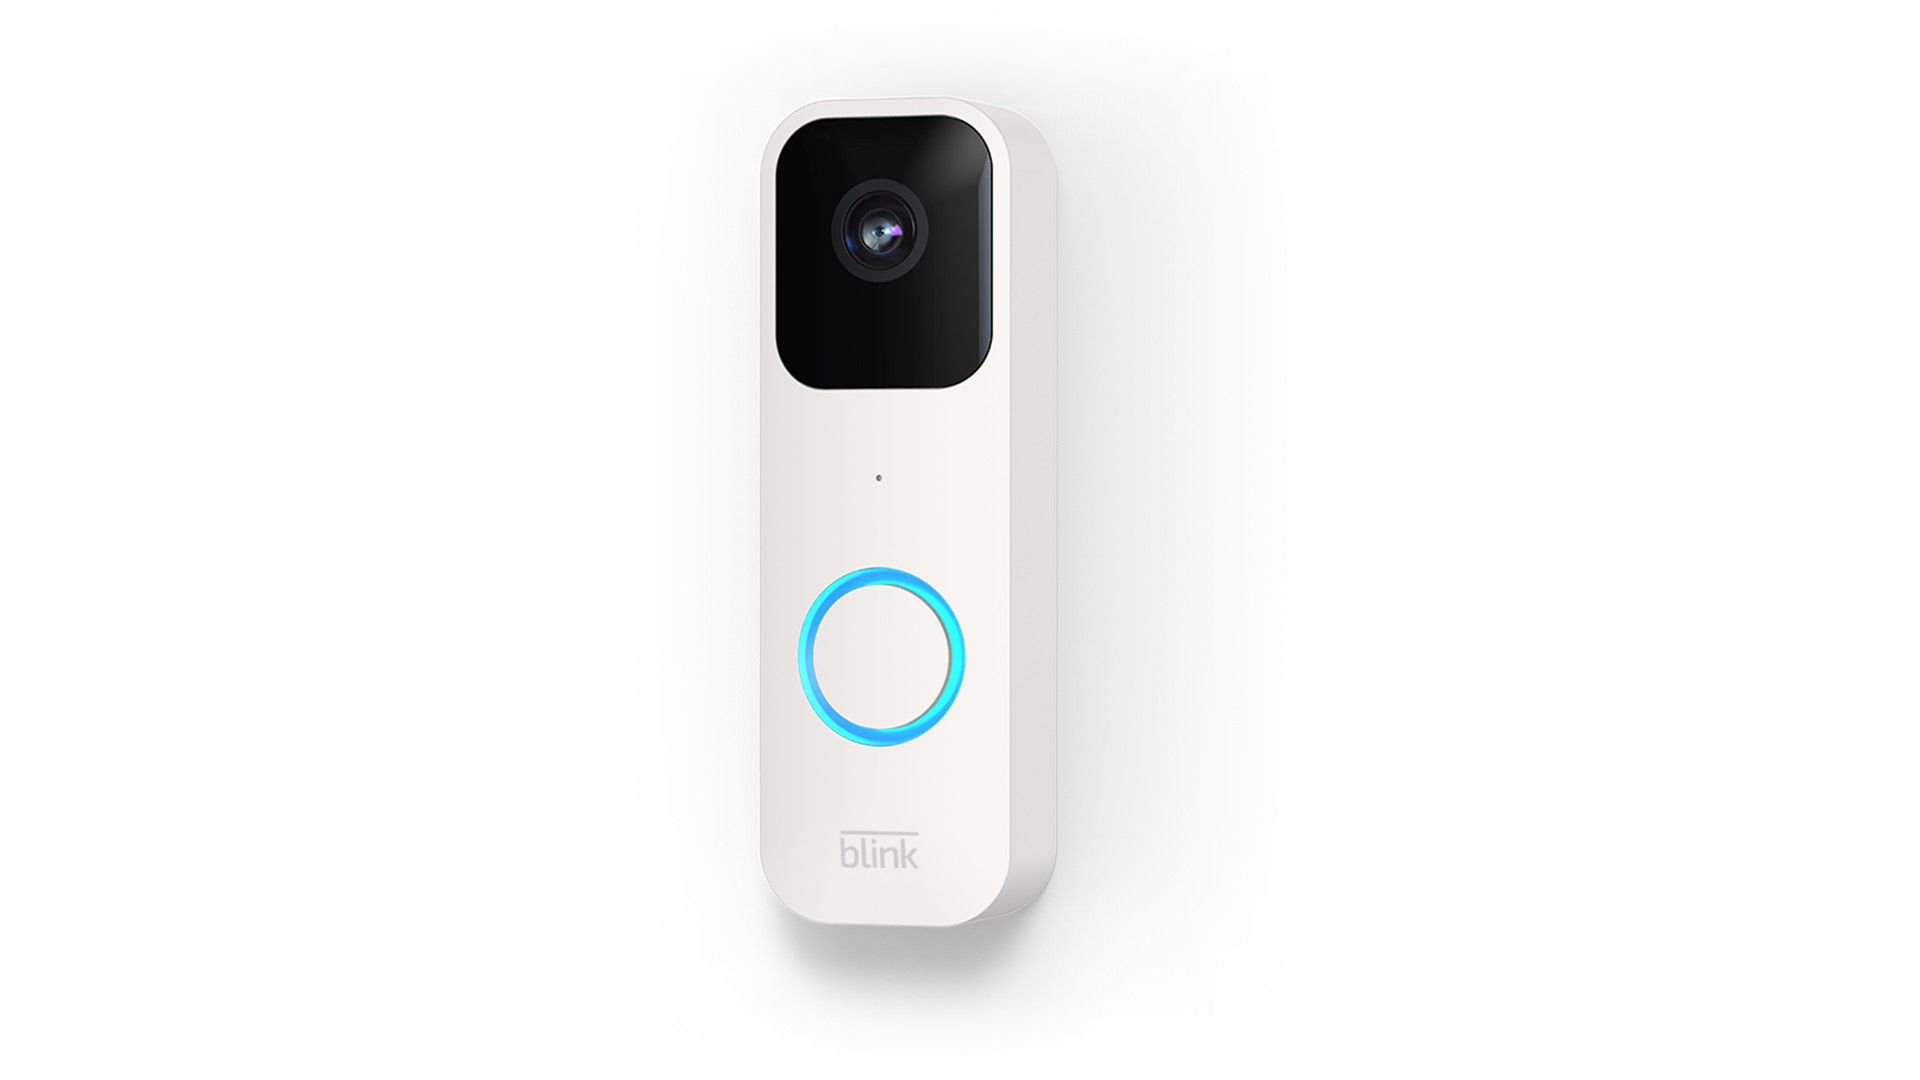 White Blink smart doorbell camera with a large black camera lens